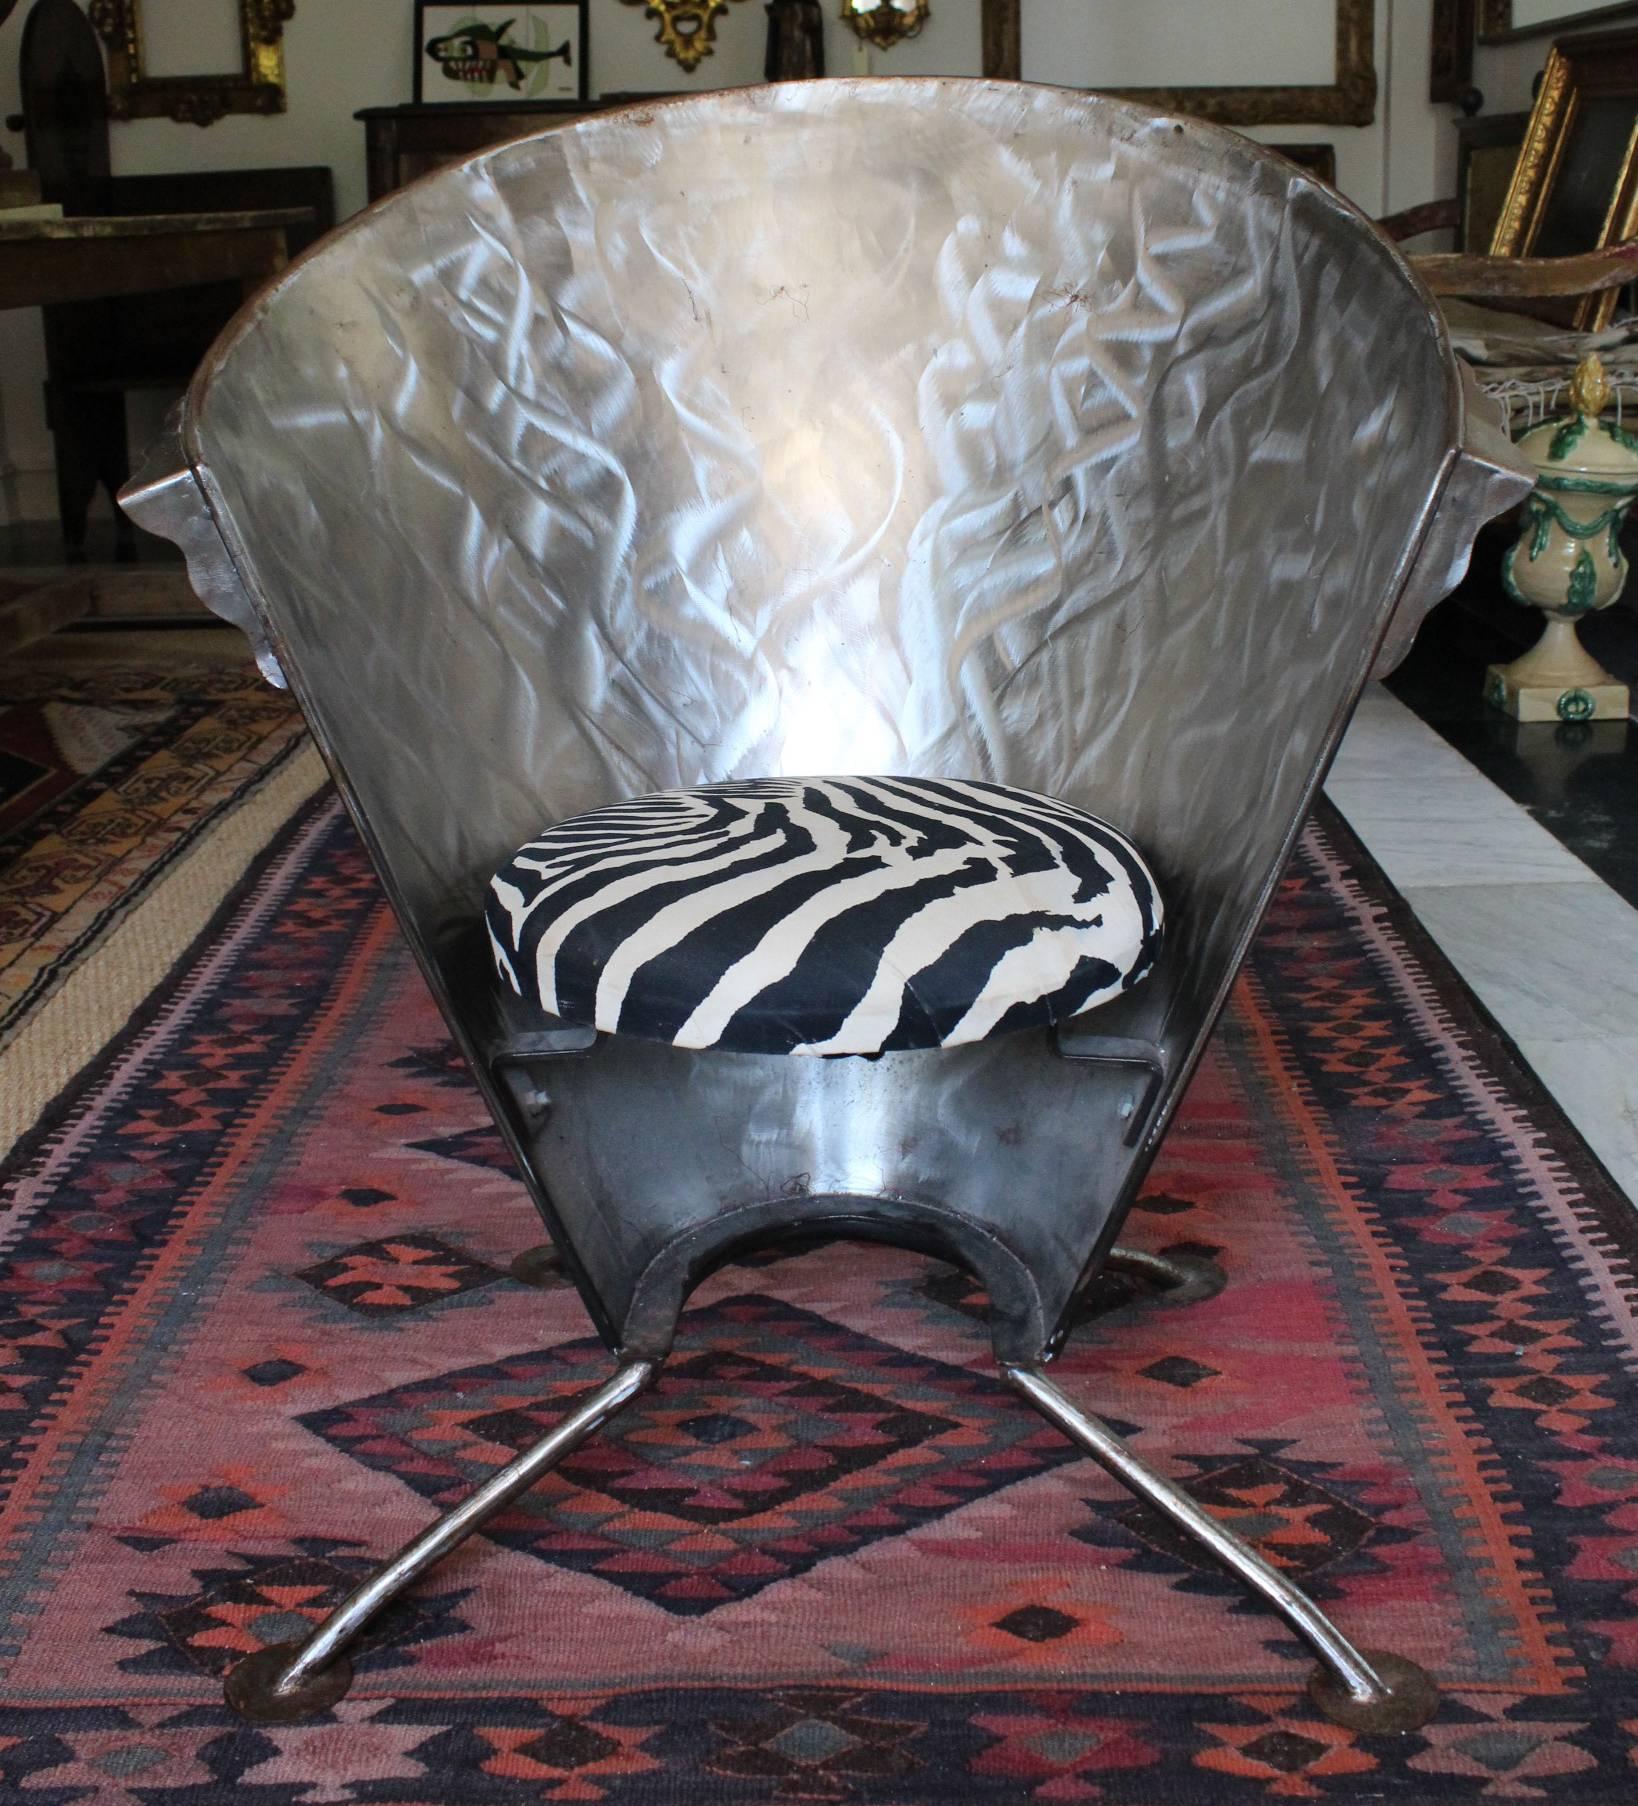 1980s Original French polished steel sofa chair with S-shaped patterns and zebra upholstery decorations.

